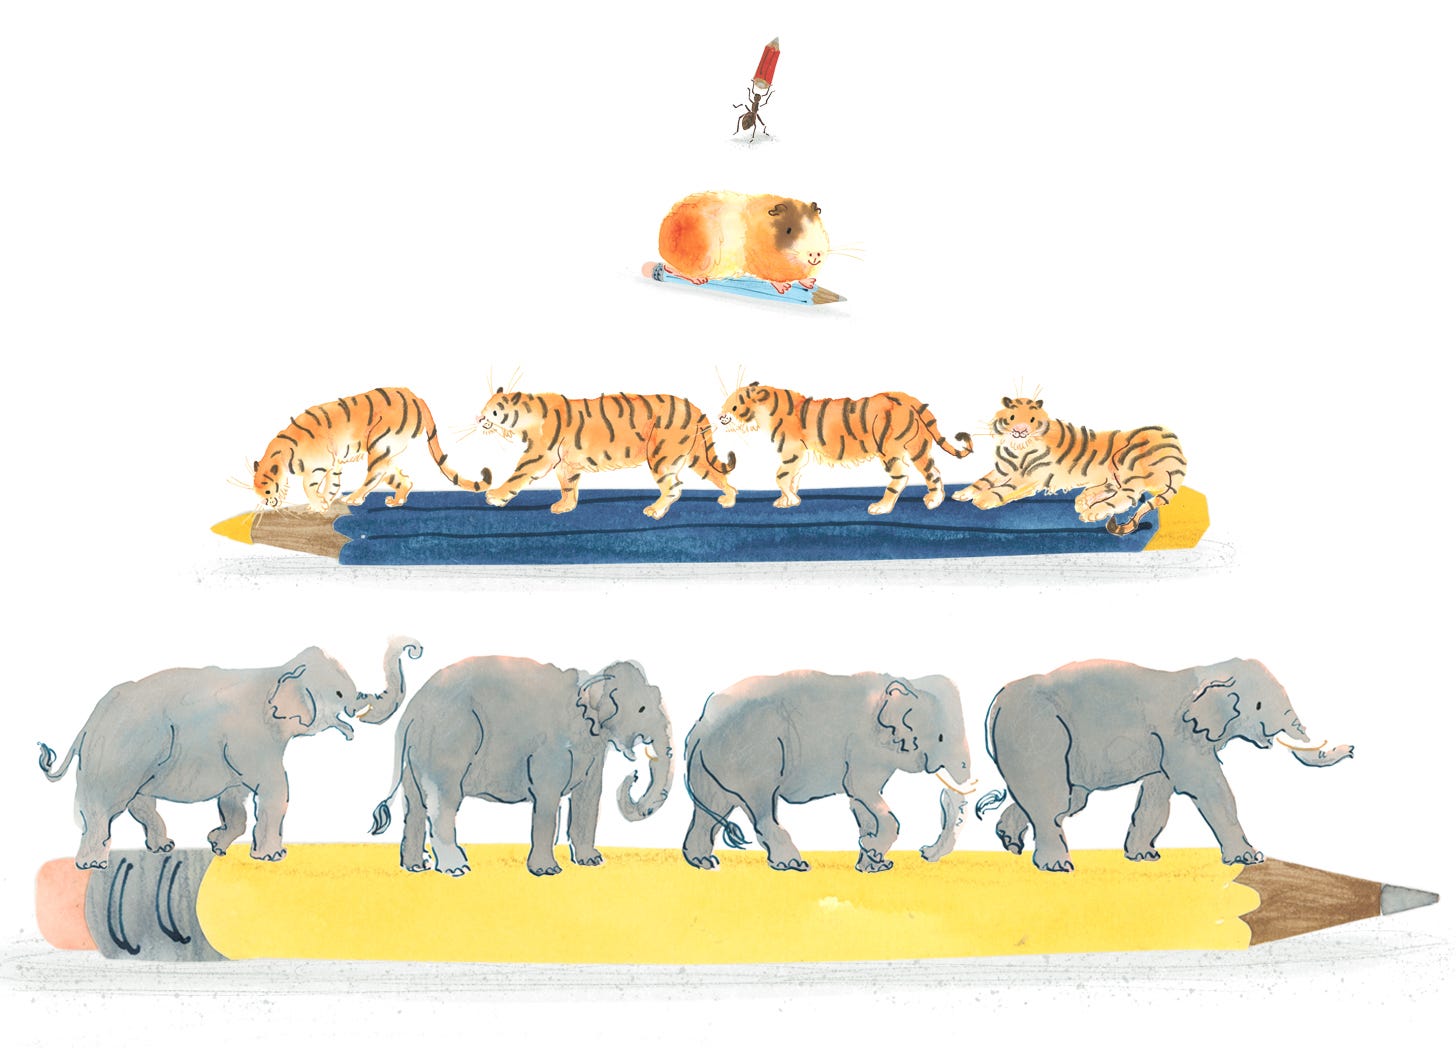 Watercolour and collage illustration by Nanette Regan. An ant holds up a tiny red pencil, below it a guinea pig sits on top of a pale blue pencil. Below that four tigers walk across a colouring pencil. Underneath that four elephants stride across a yellow graphite pencil 